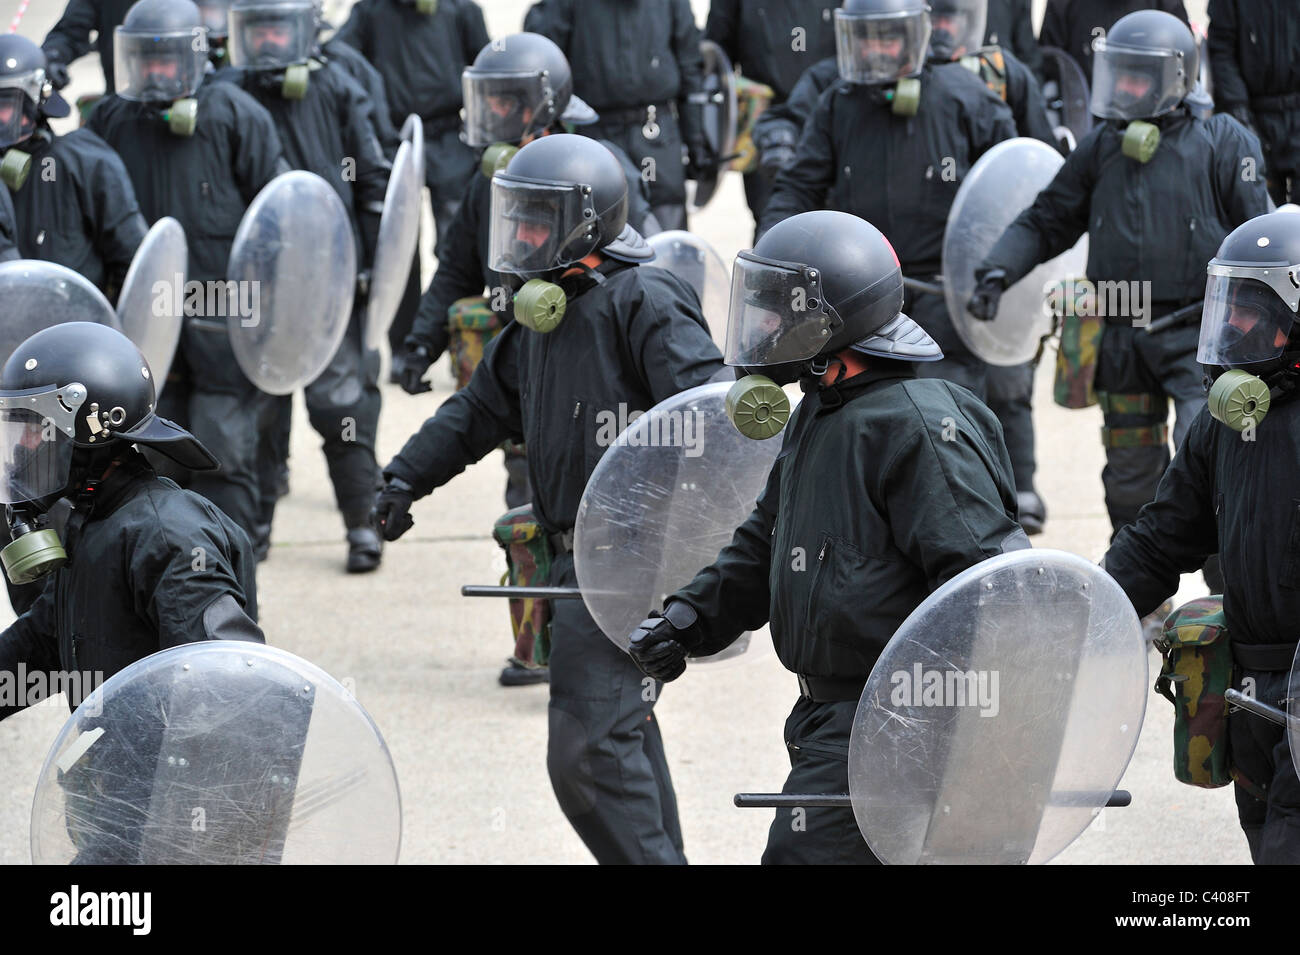 Riot squad police officers forming a protective barrier with riot shields during exercise of the Belgian army, Belgium Stock Photo